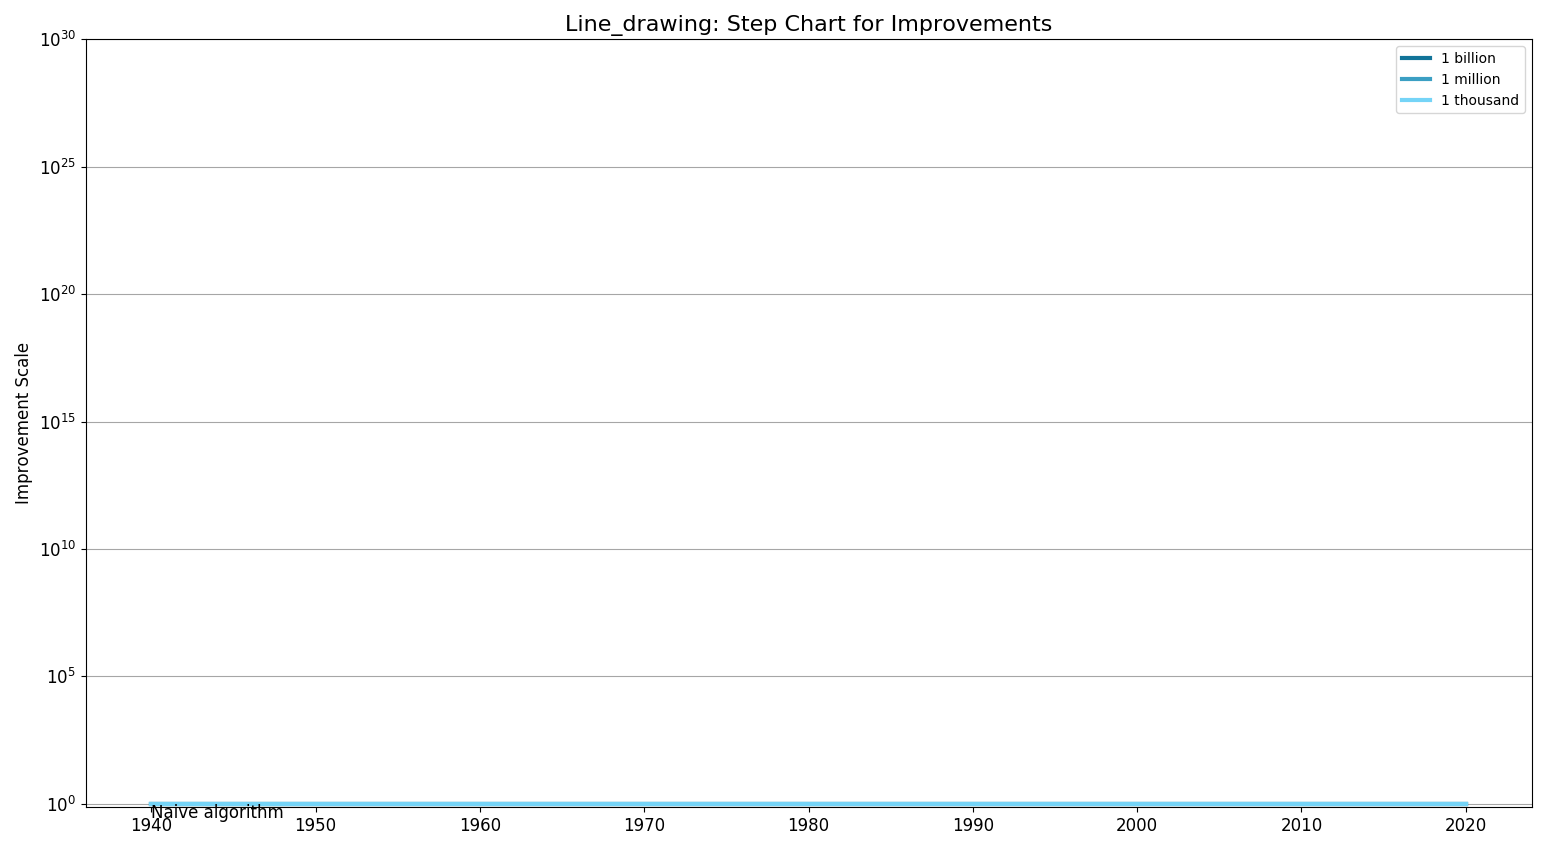 Line drawingStepChart.png